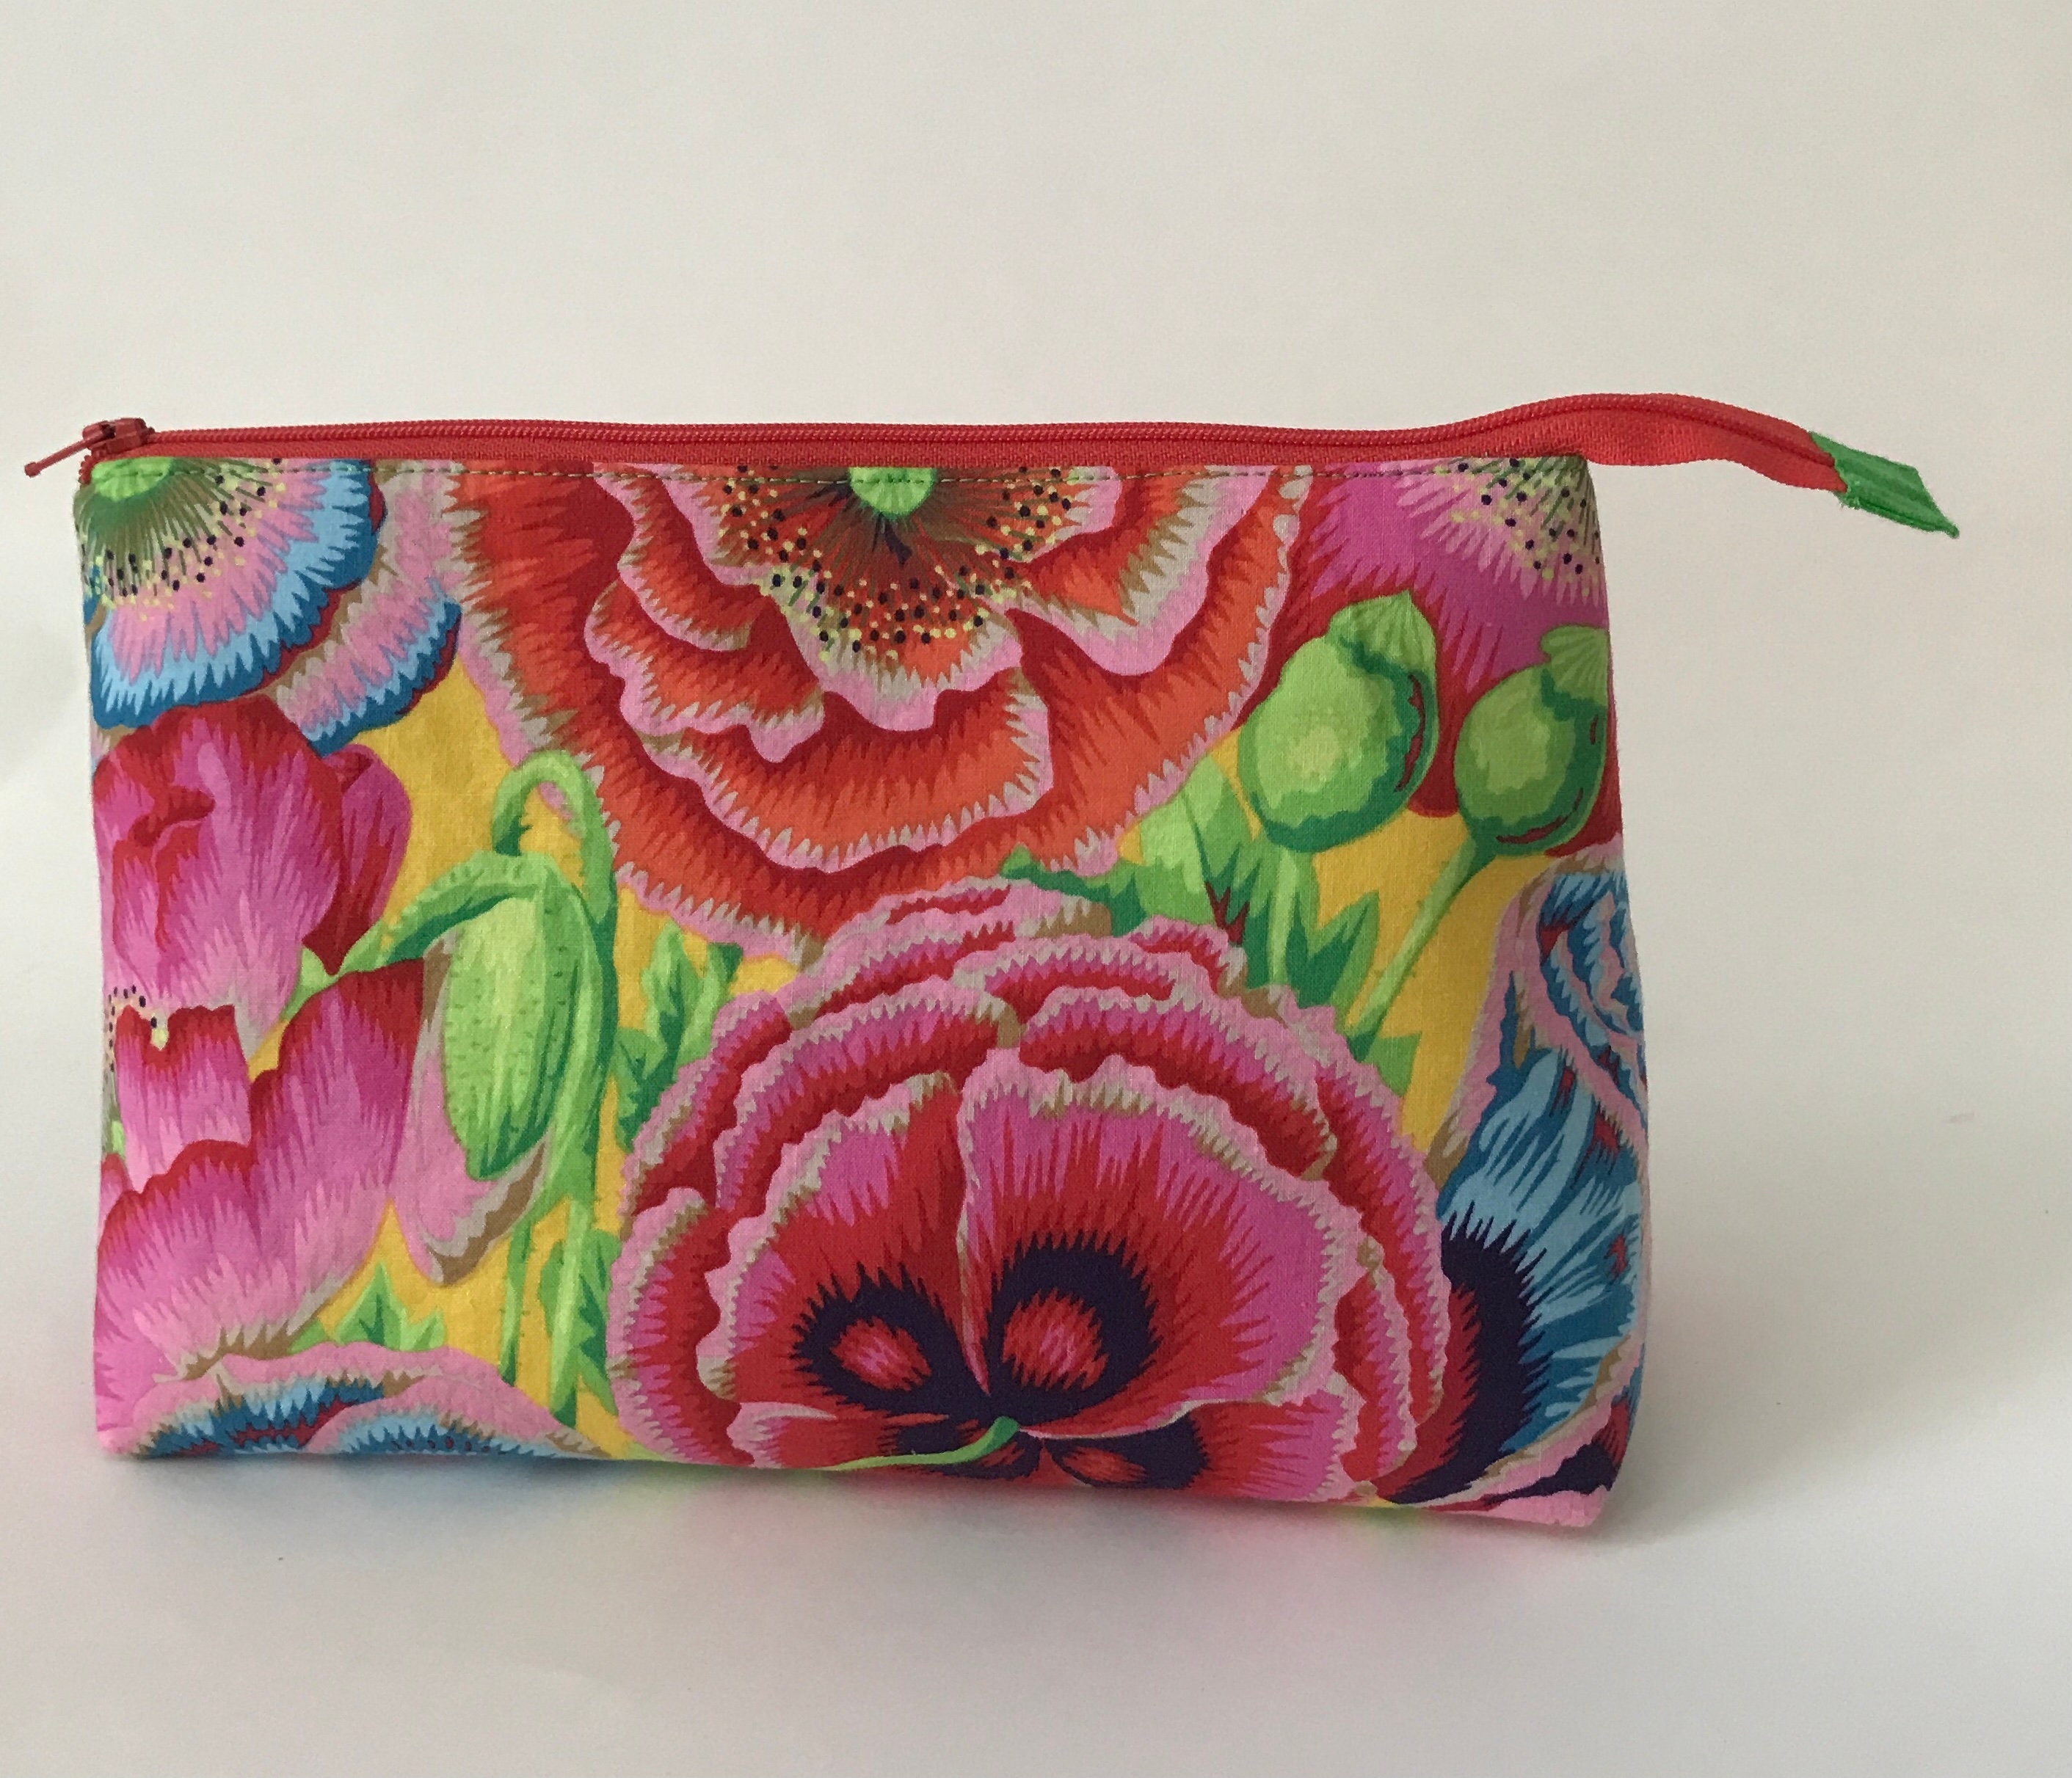 Colorful KAFFE FASSETT multicolored flowers cotton fabric Cosmetic Bag